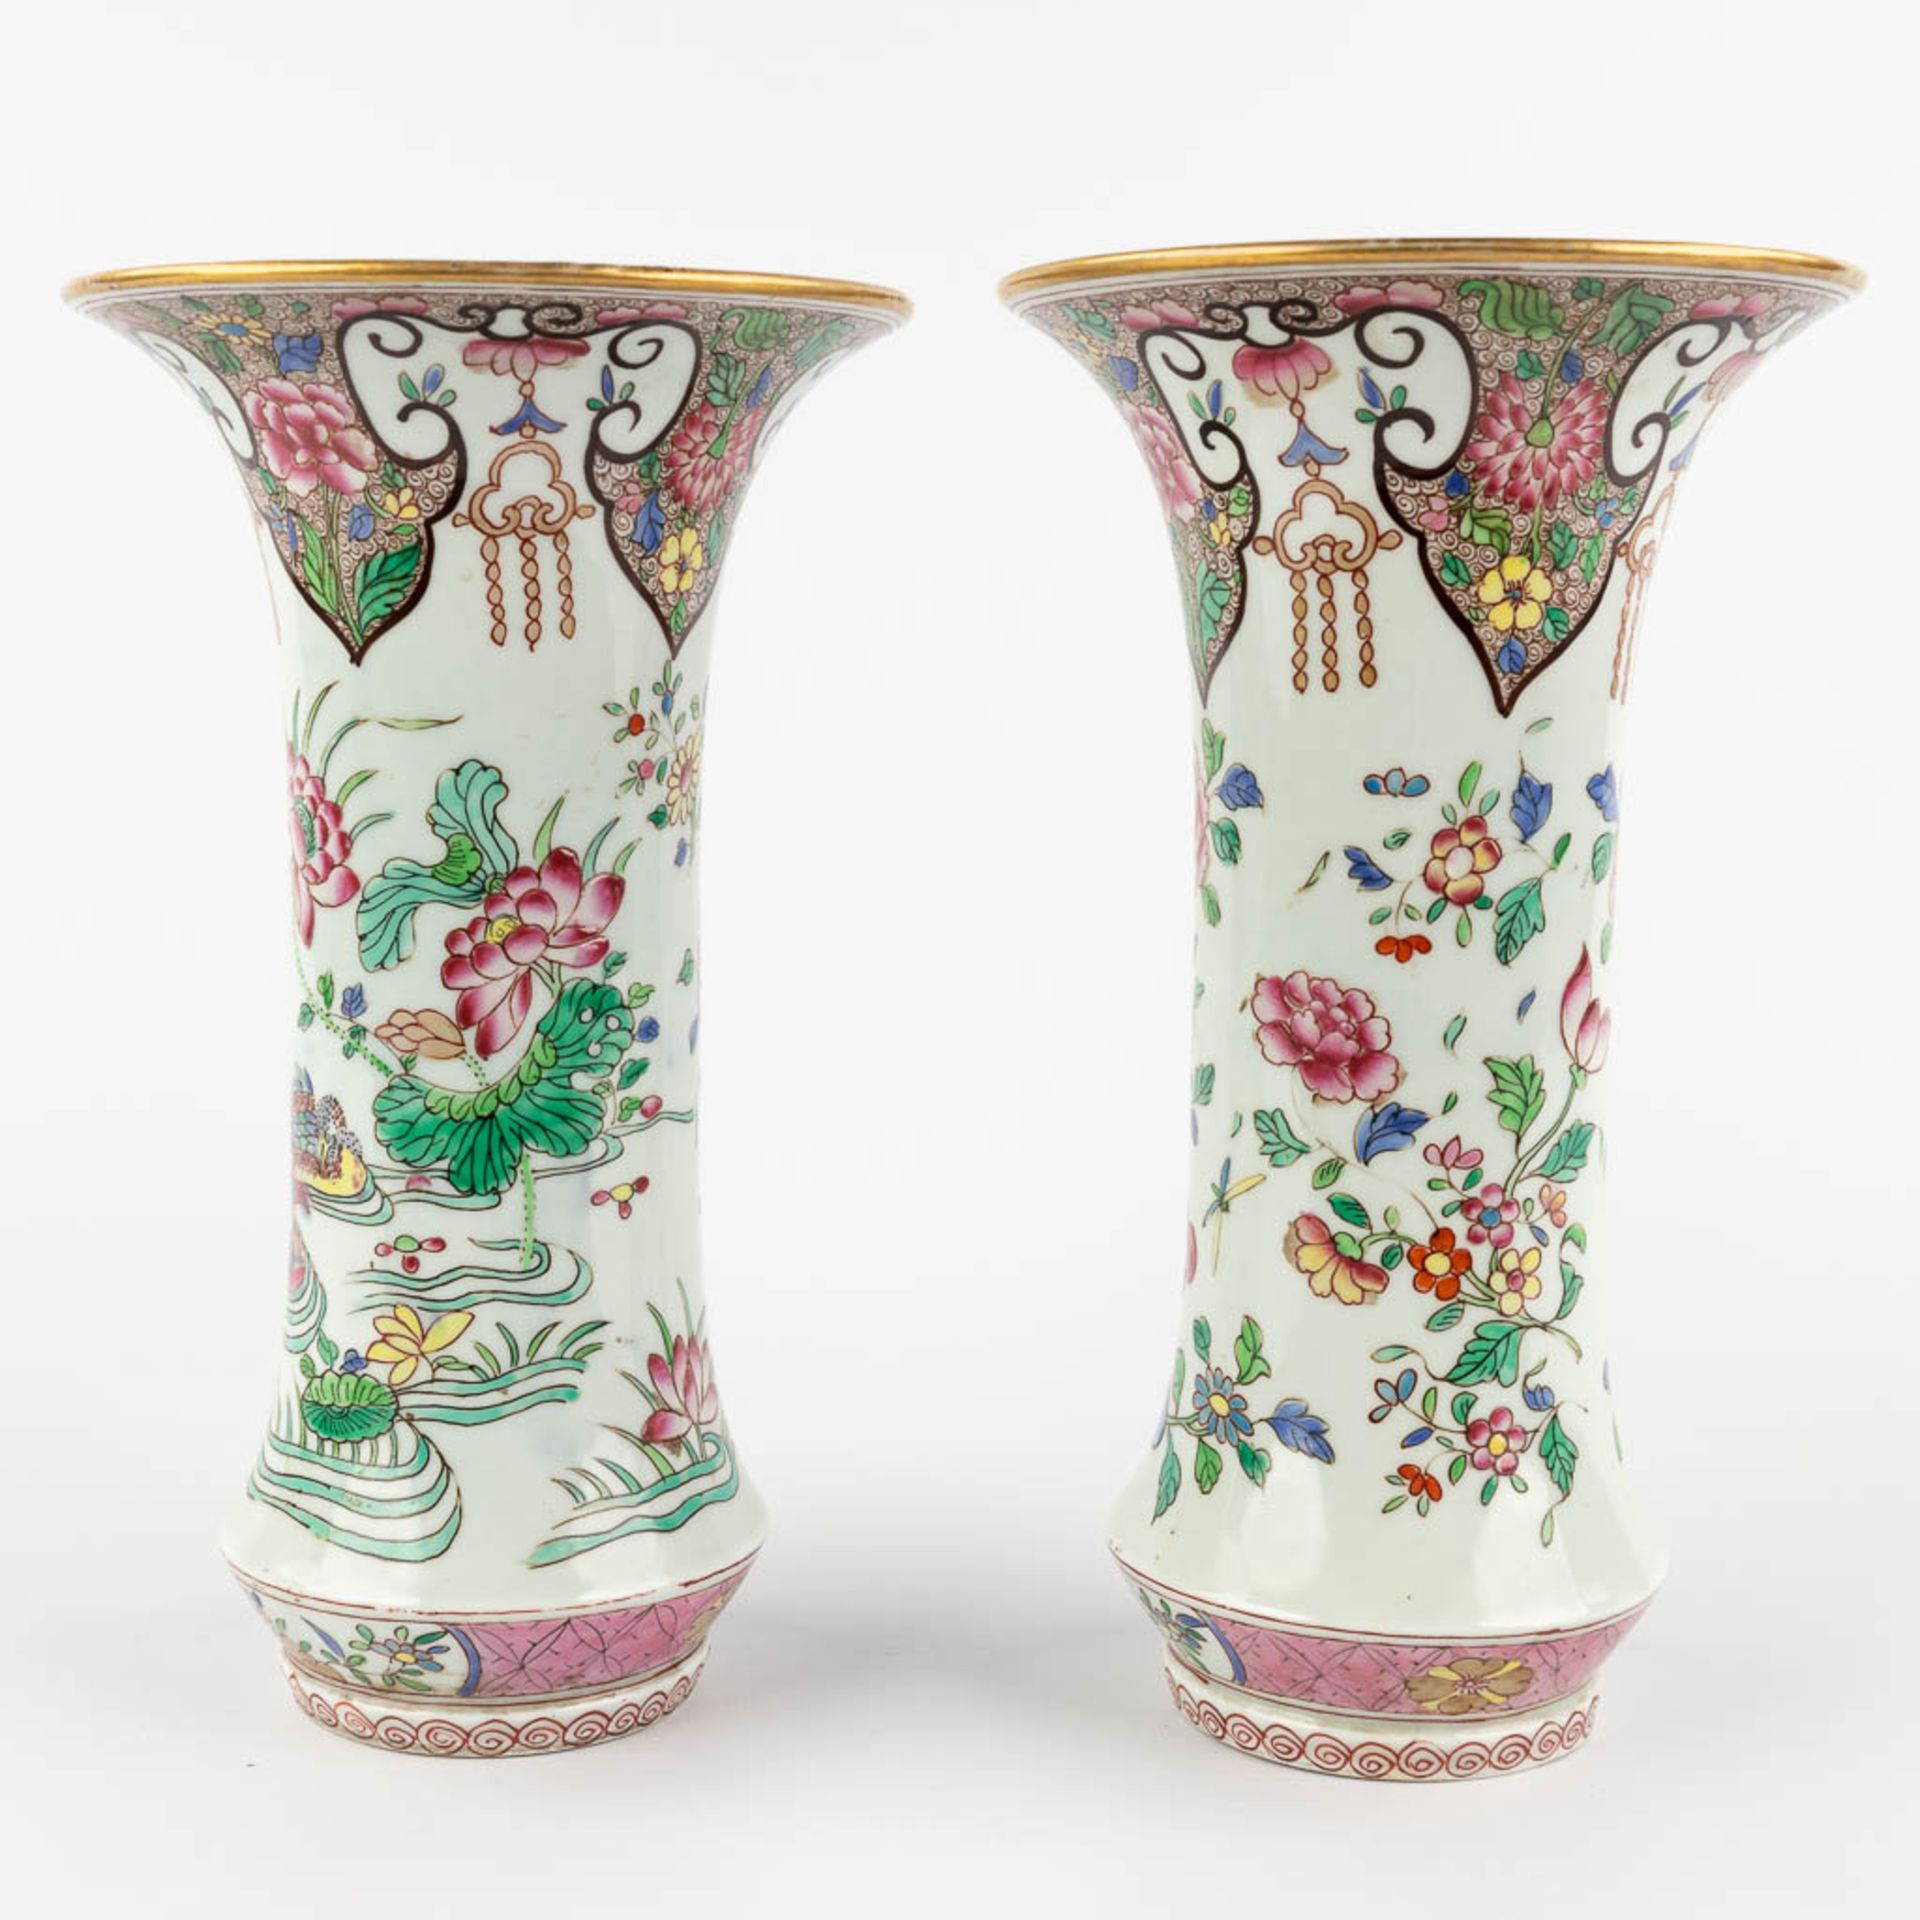 Samson, a 5-piece Kaststel, vases with lid and trumpet vases. Chinoiserie decor. (H:43 x D:21 cm) - Image 19 of 21